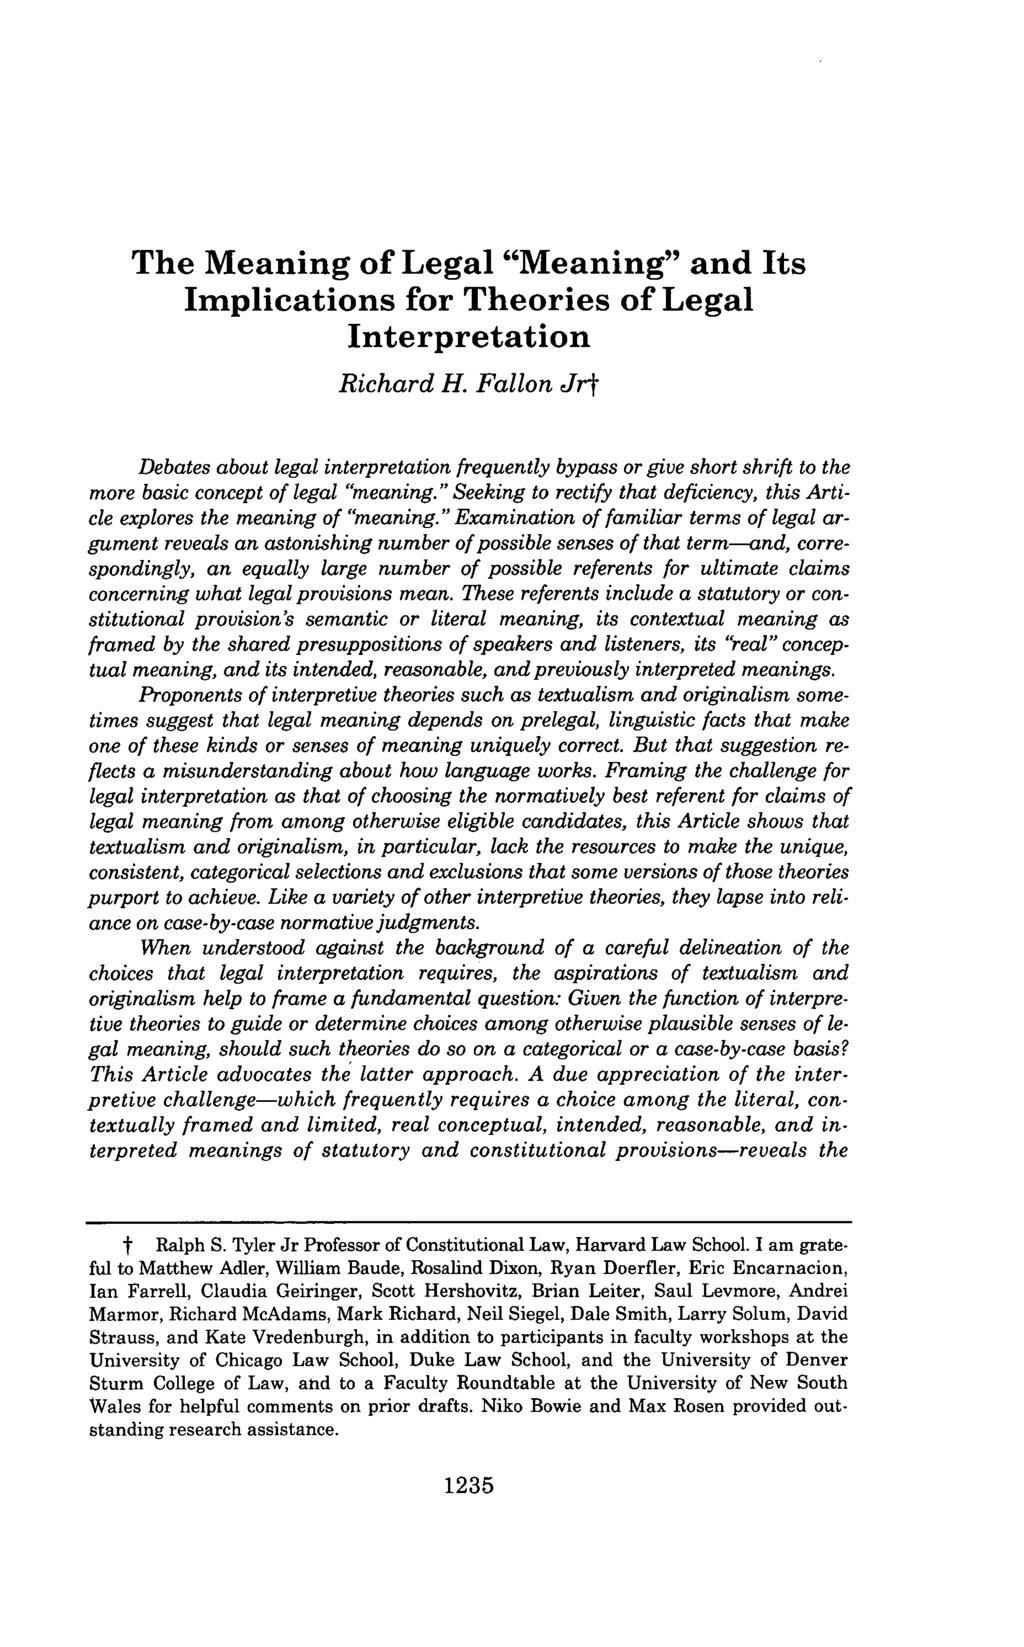 The Meaning of Legal "Meaning" and Its Implications for Theories of Legal Interpretation Richard H.